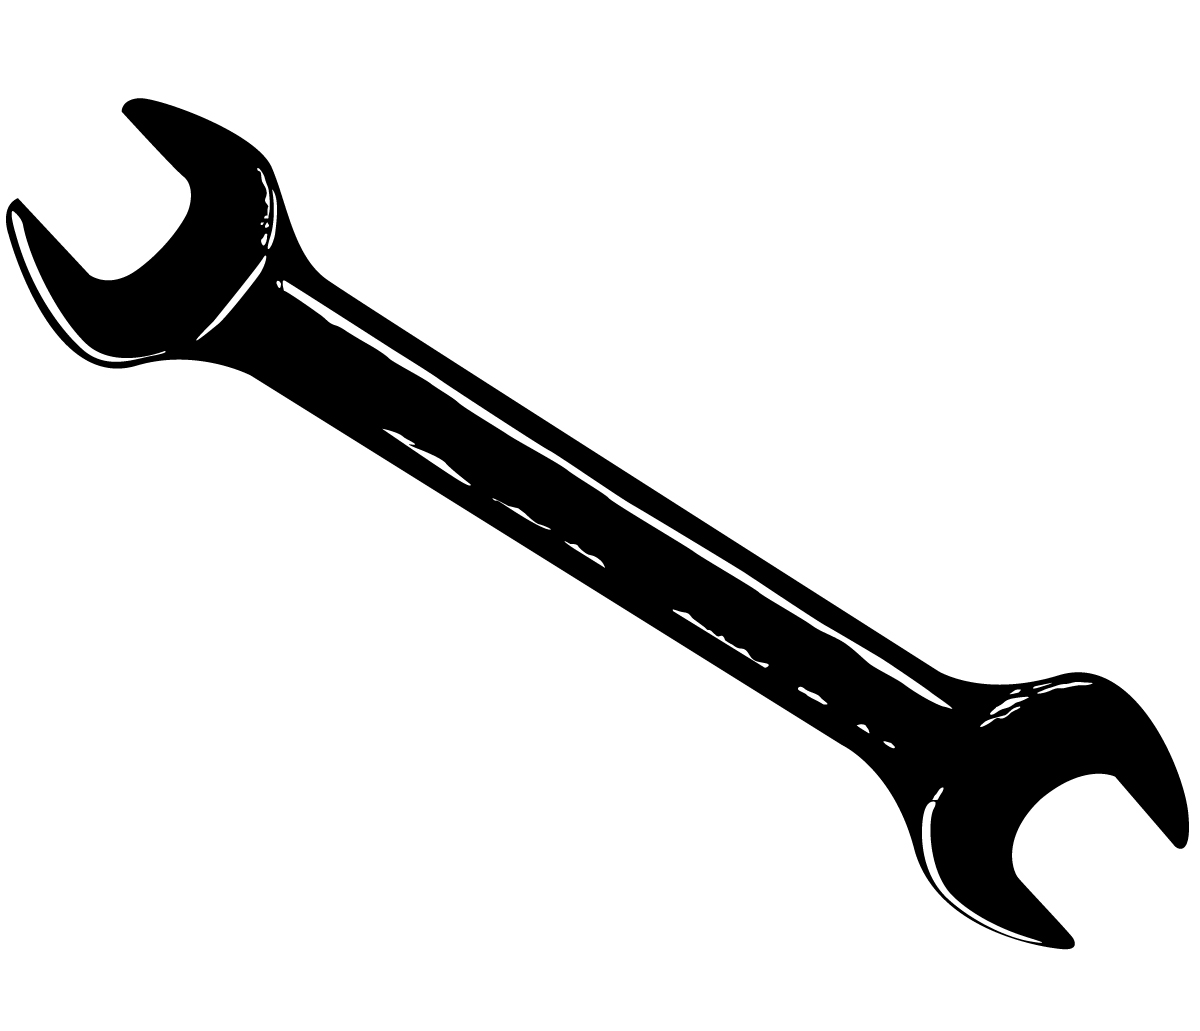 Wrench #2